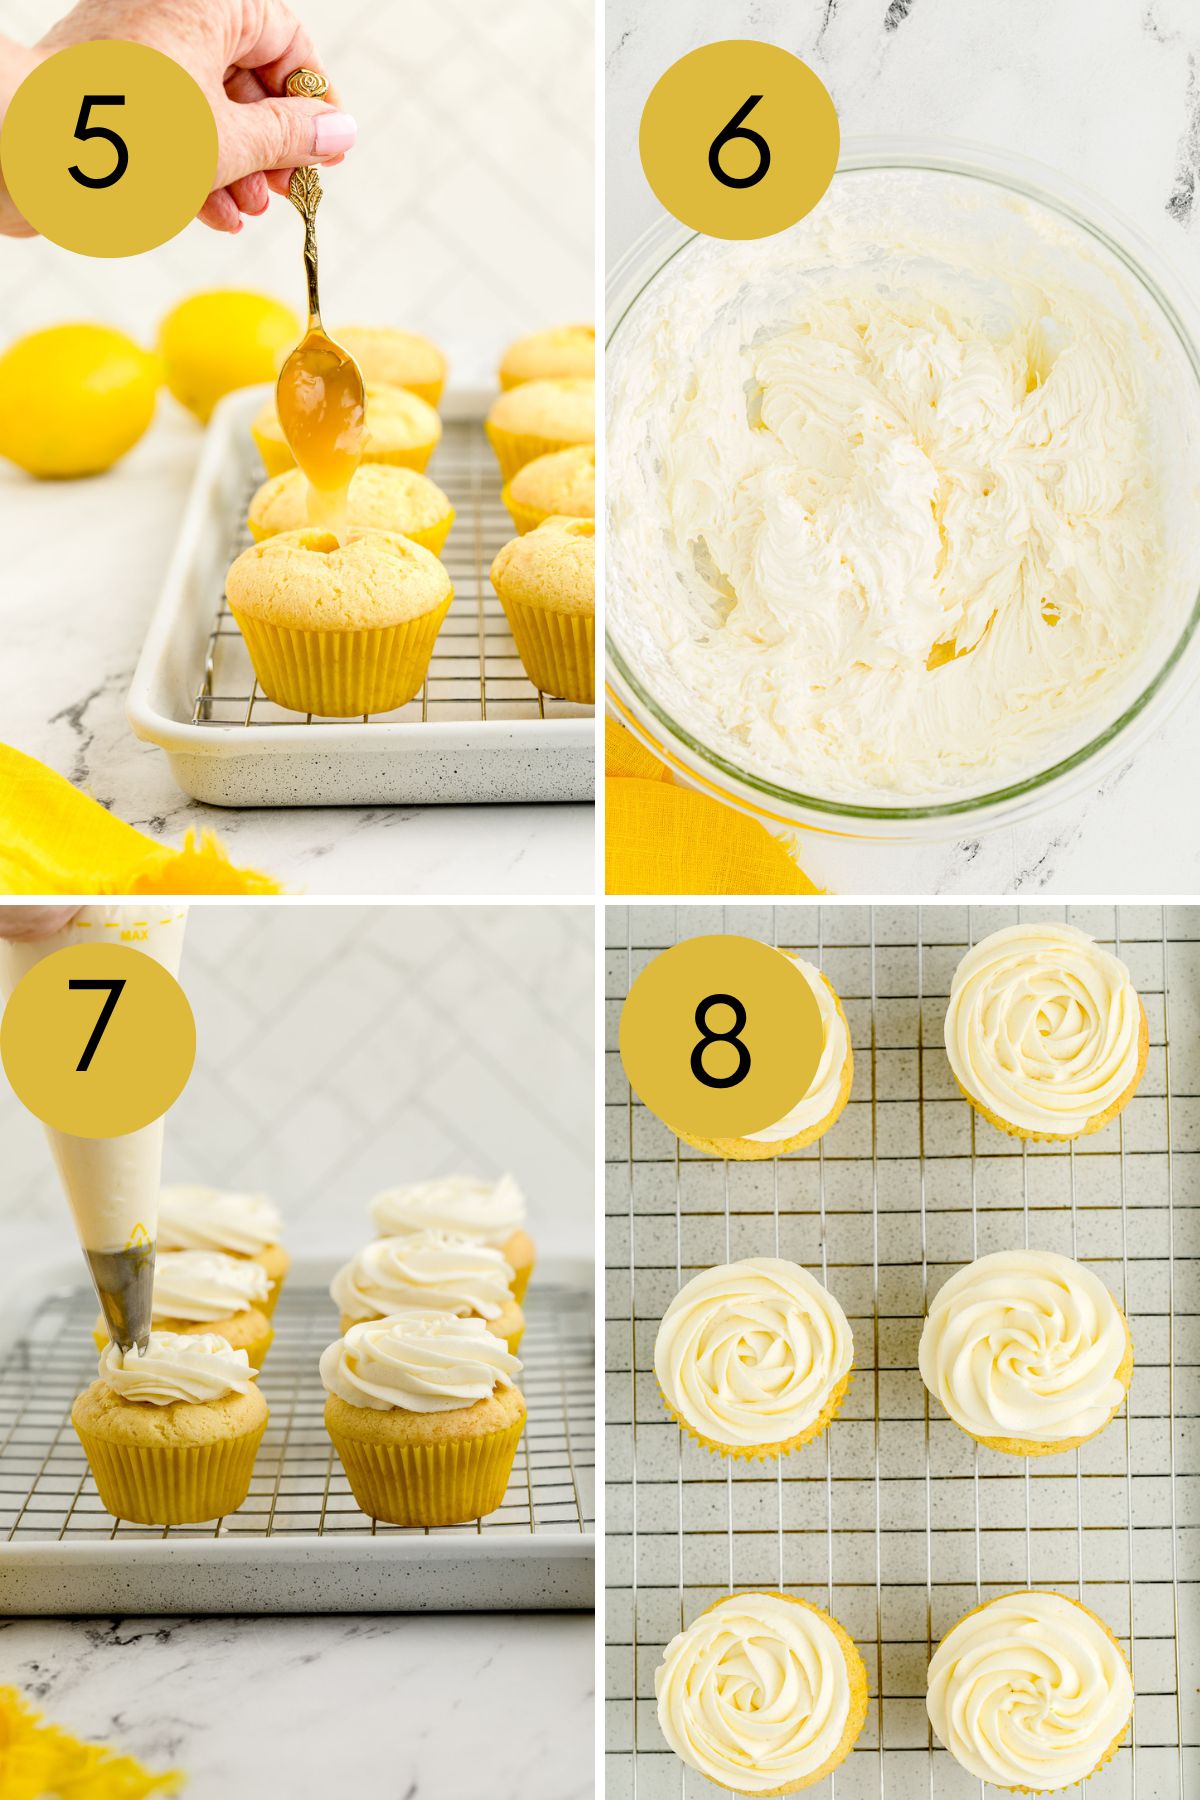 Additional steps to make these cupcakes.